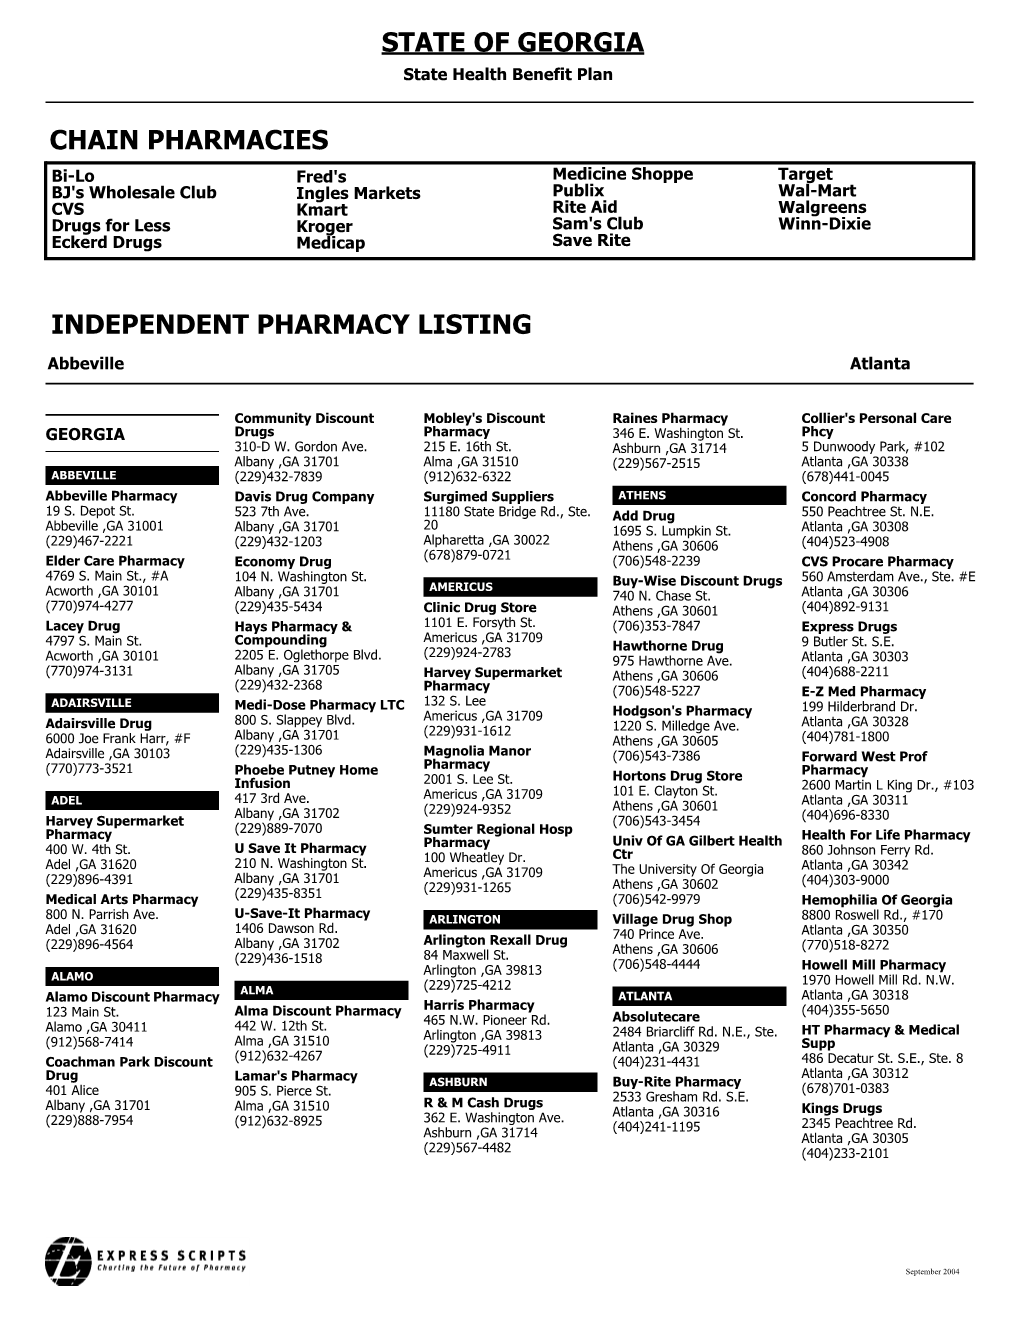 Independent Pharmacy Listing